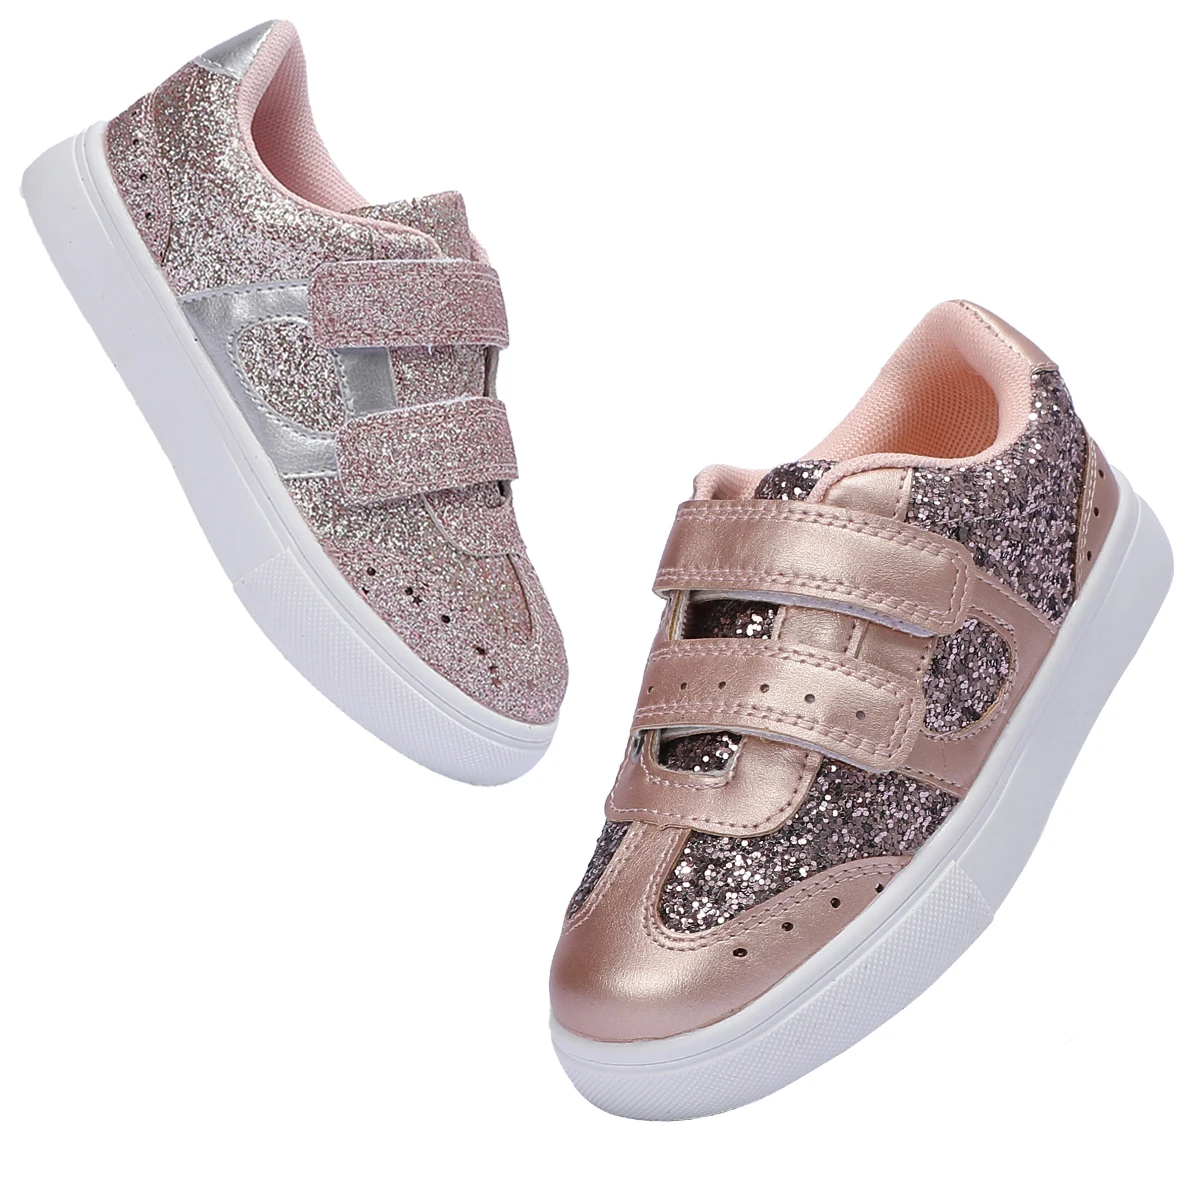 Girls Glitter Shoes Kids Sneakers Toddler Laceless Slip On Walking School Shoe for Gift Party Birthday Christmas Halloween